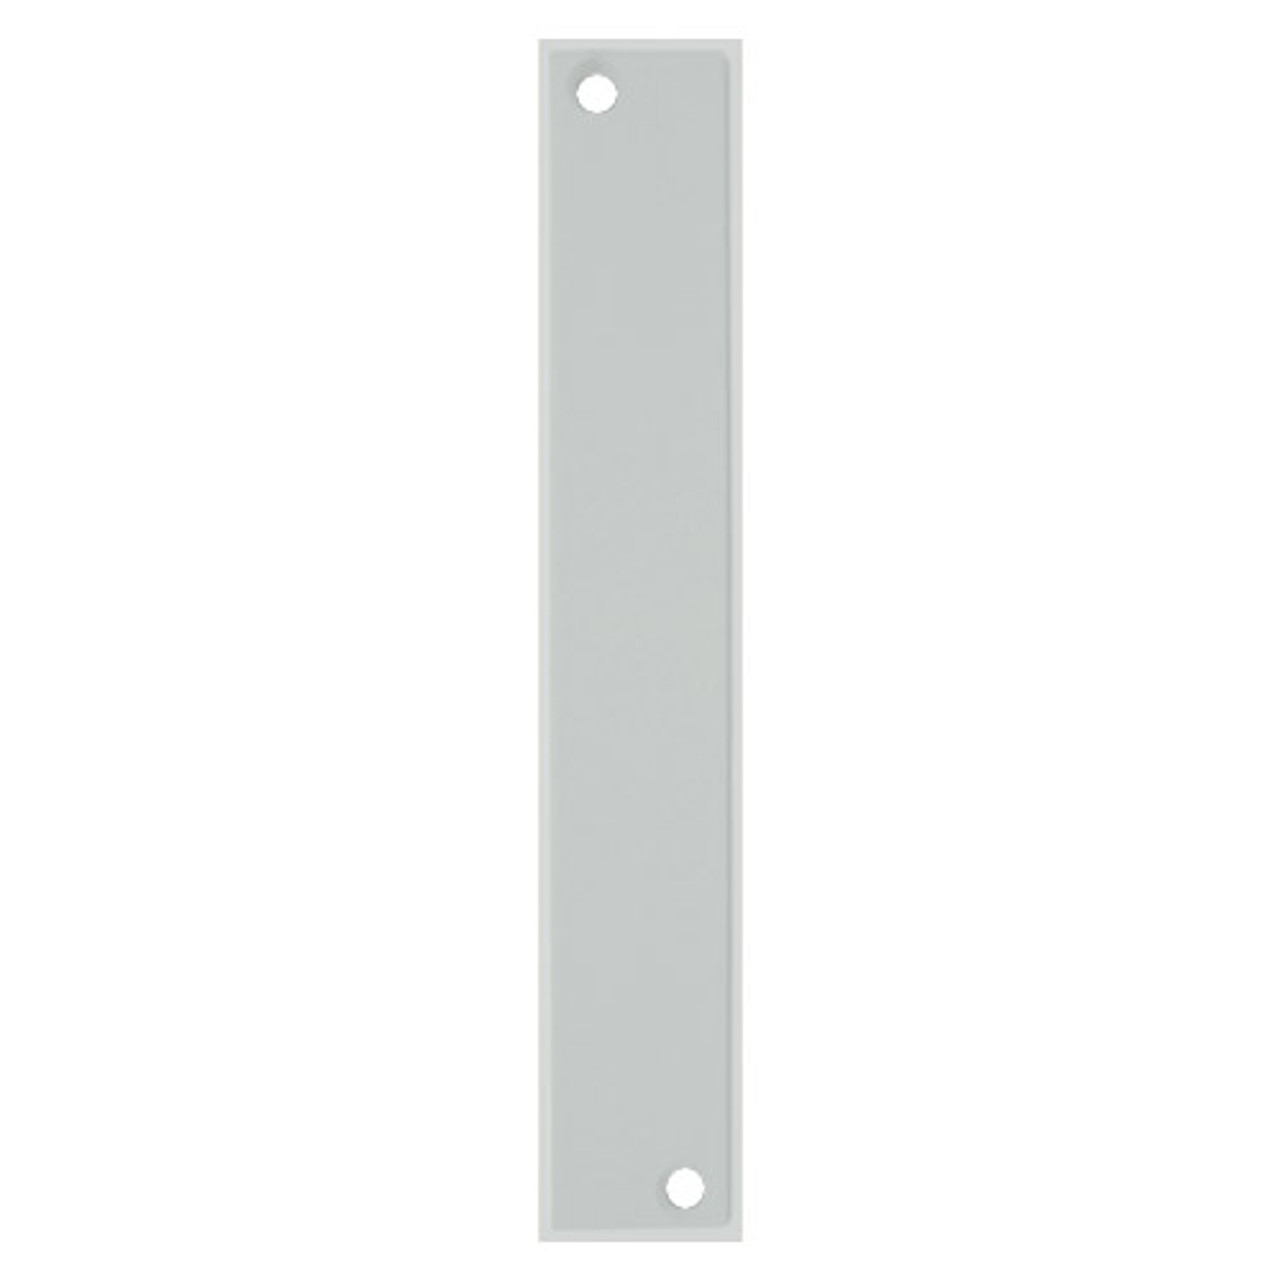 EF-634-CP Don Jo Filler Plate in Chrome Plated Finish